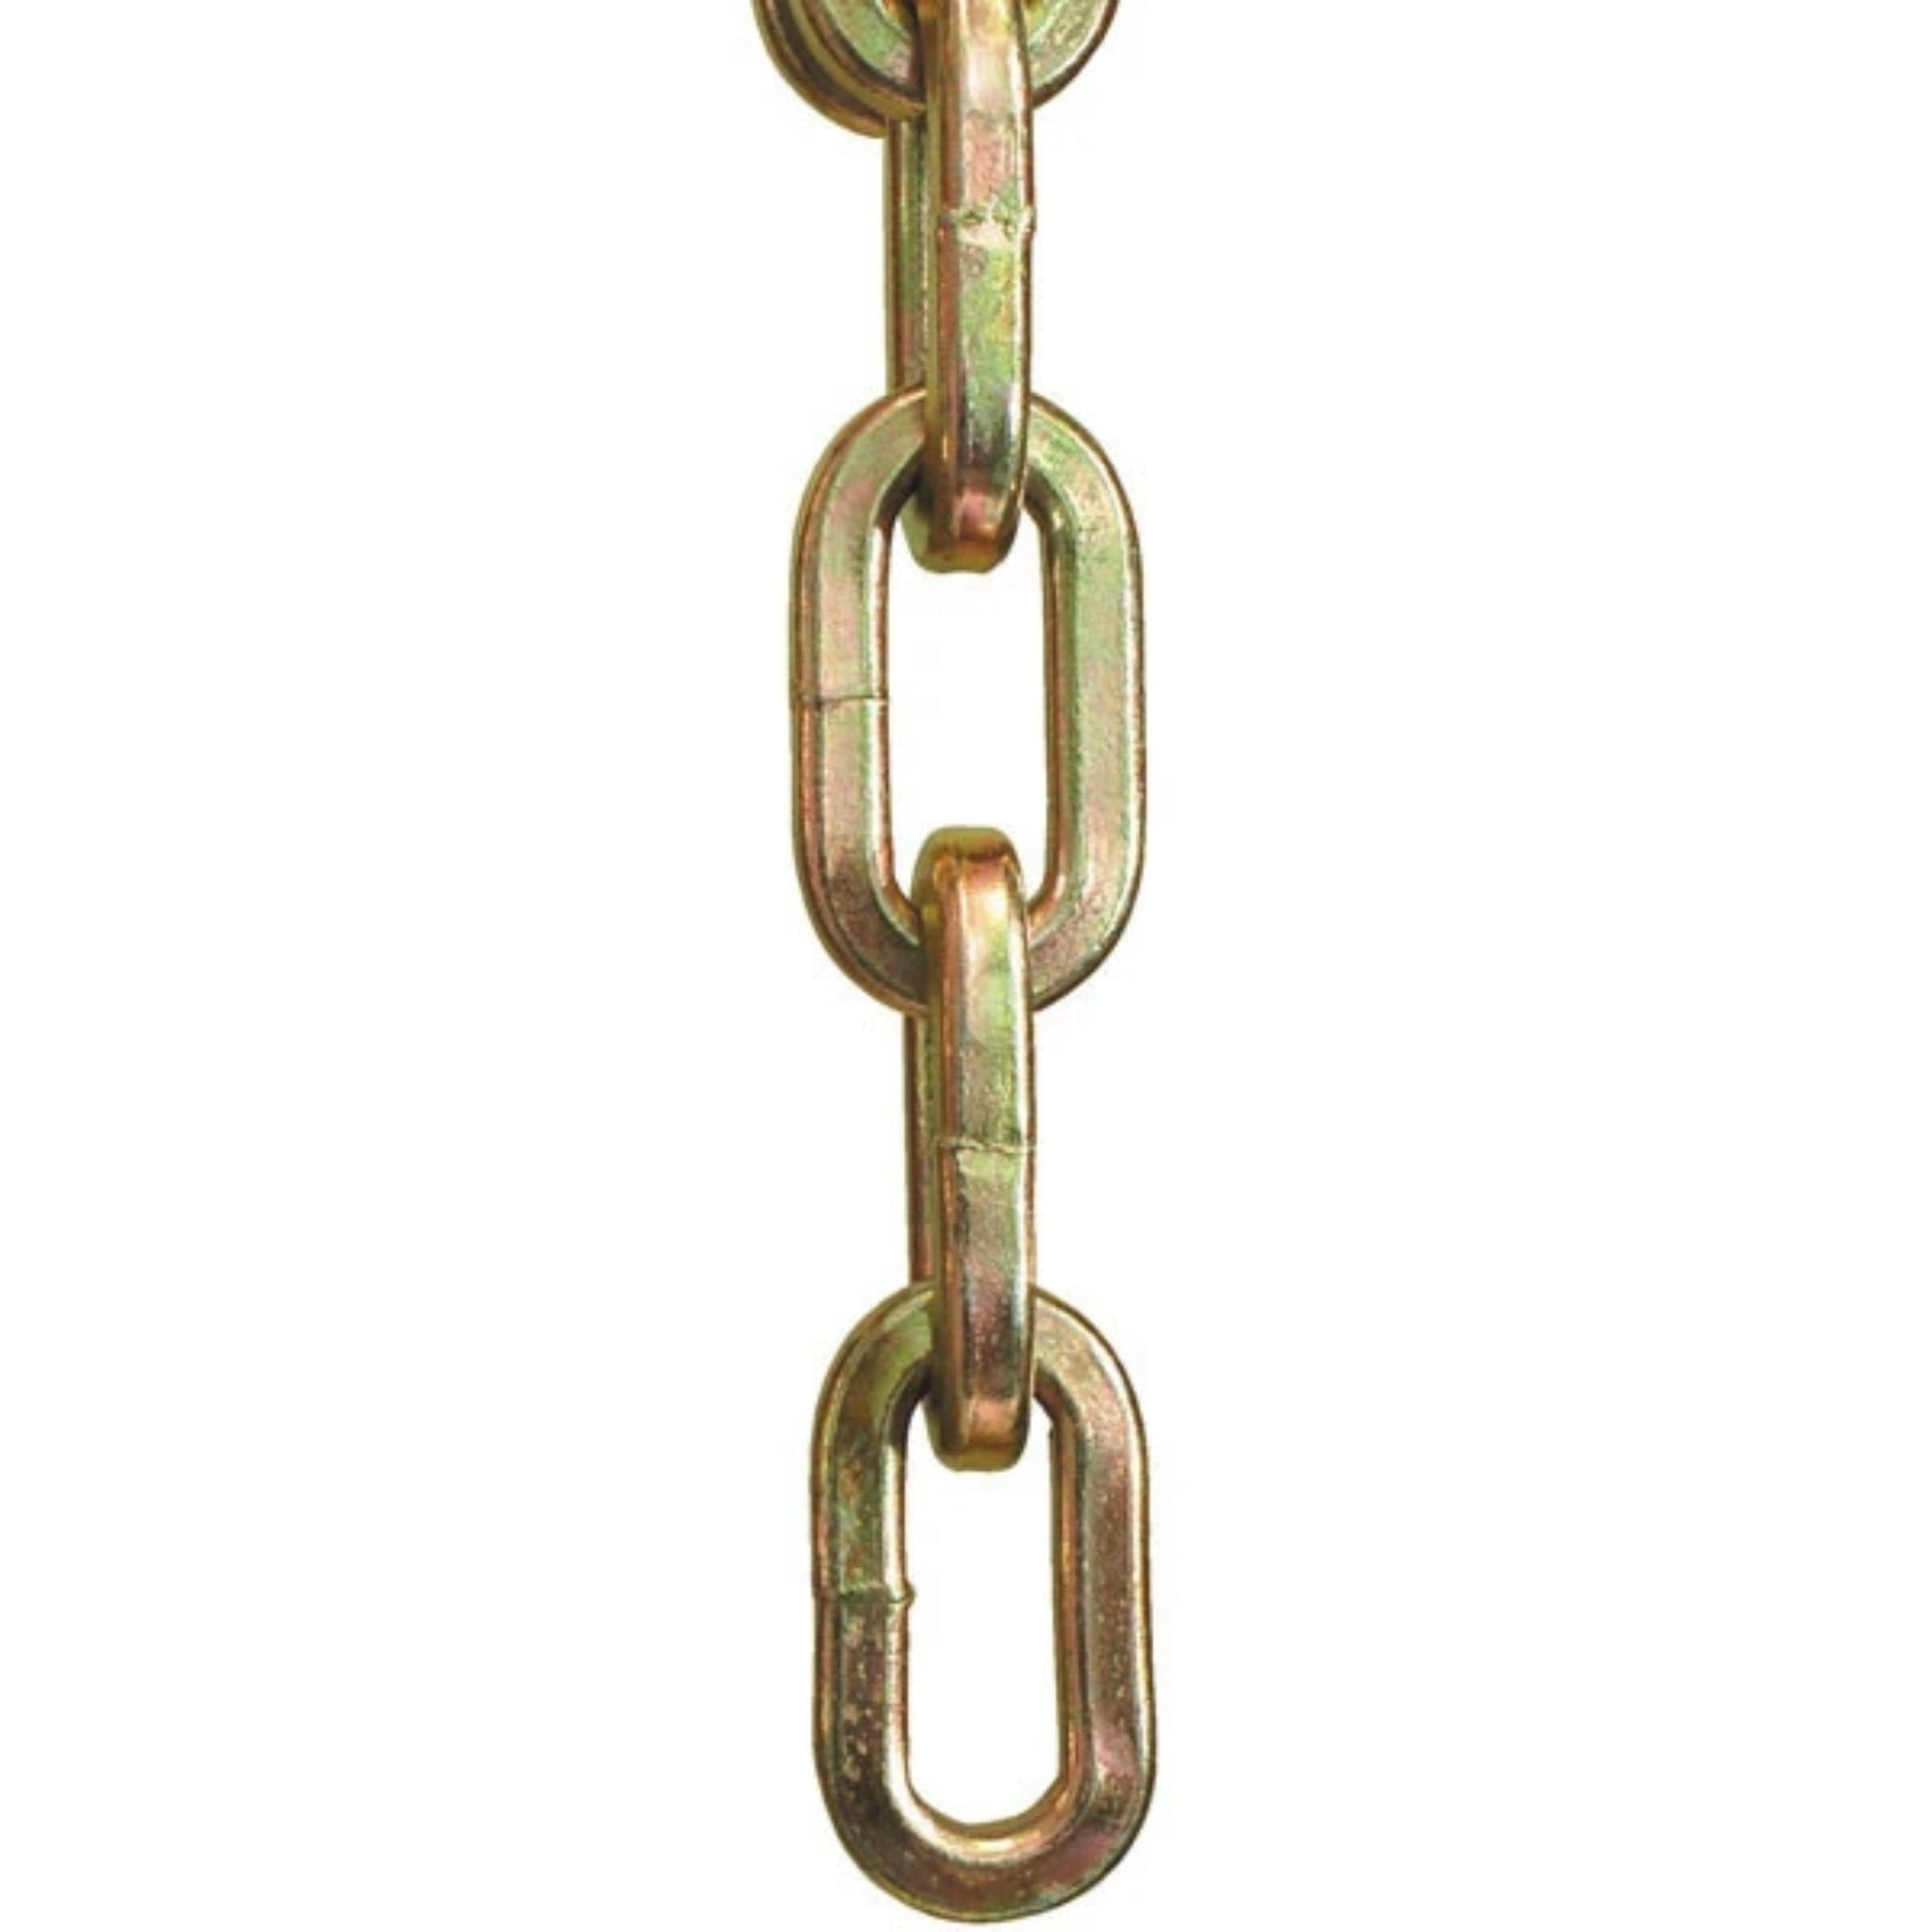 Abus 12KS 6-Foot Chain, Pre-Cut 6' Chains with 1/2" Thickness - The Lock Source